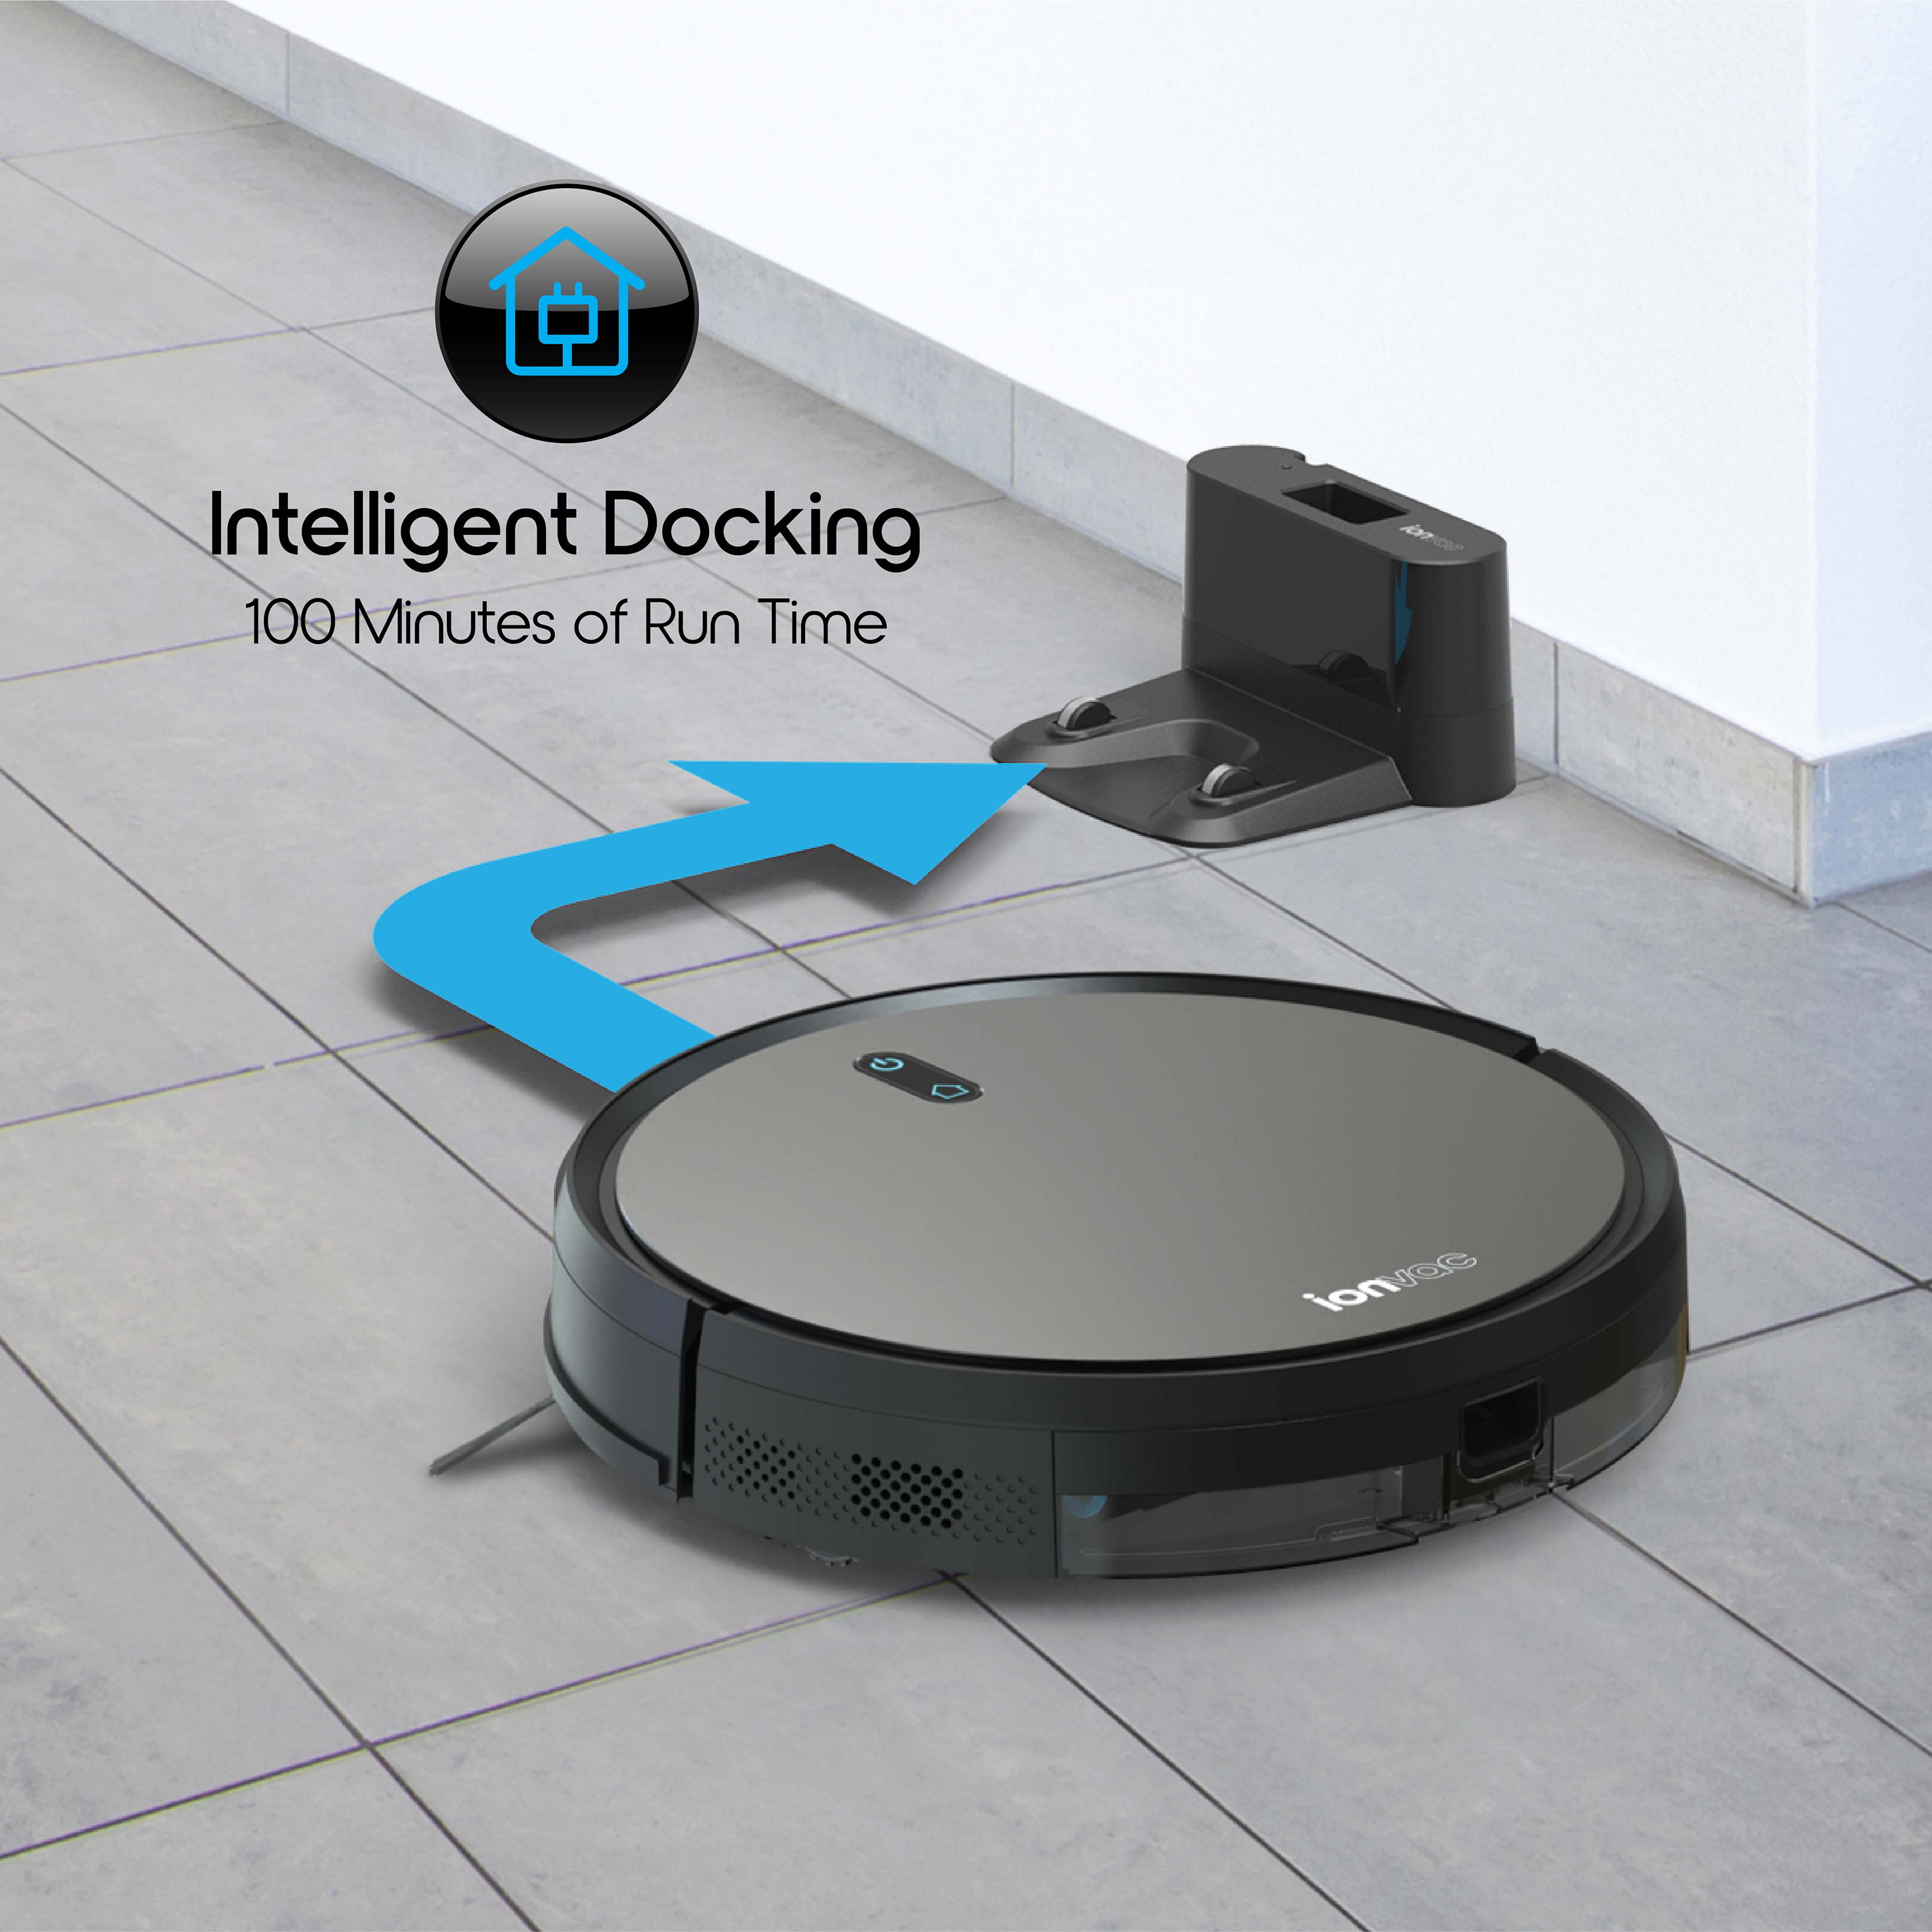 IonVac UltraClean Robovac with Smart Mapping, Wi-Fi Robot Vacuum Cleaner with App/Remote Control - image 6 of 10